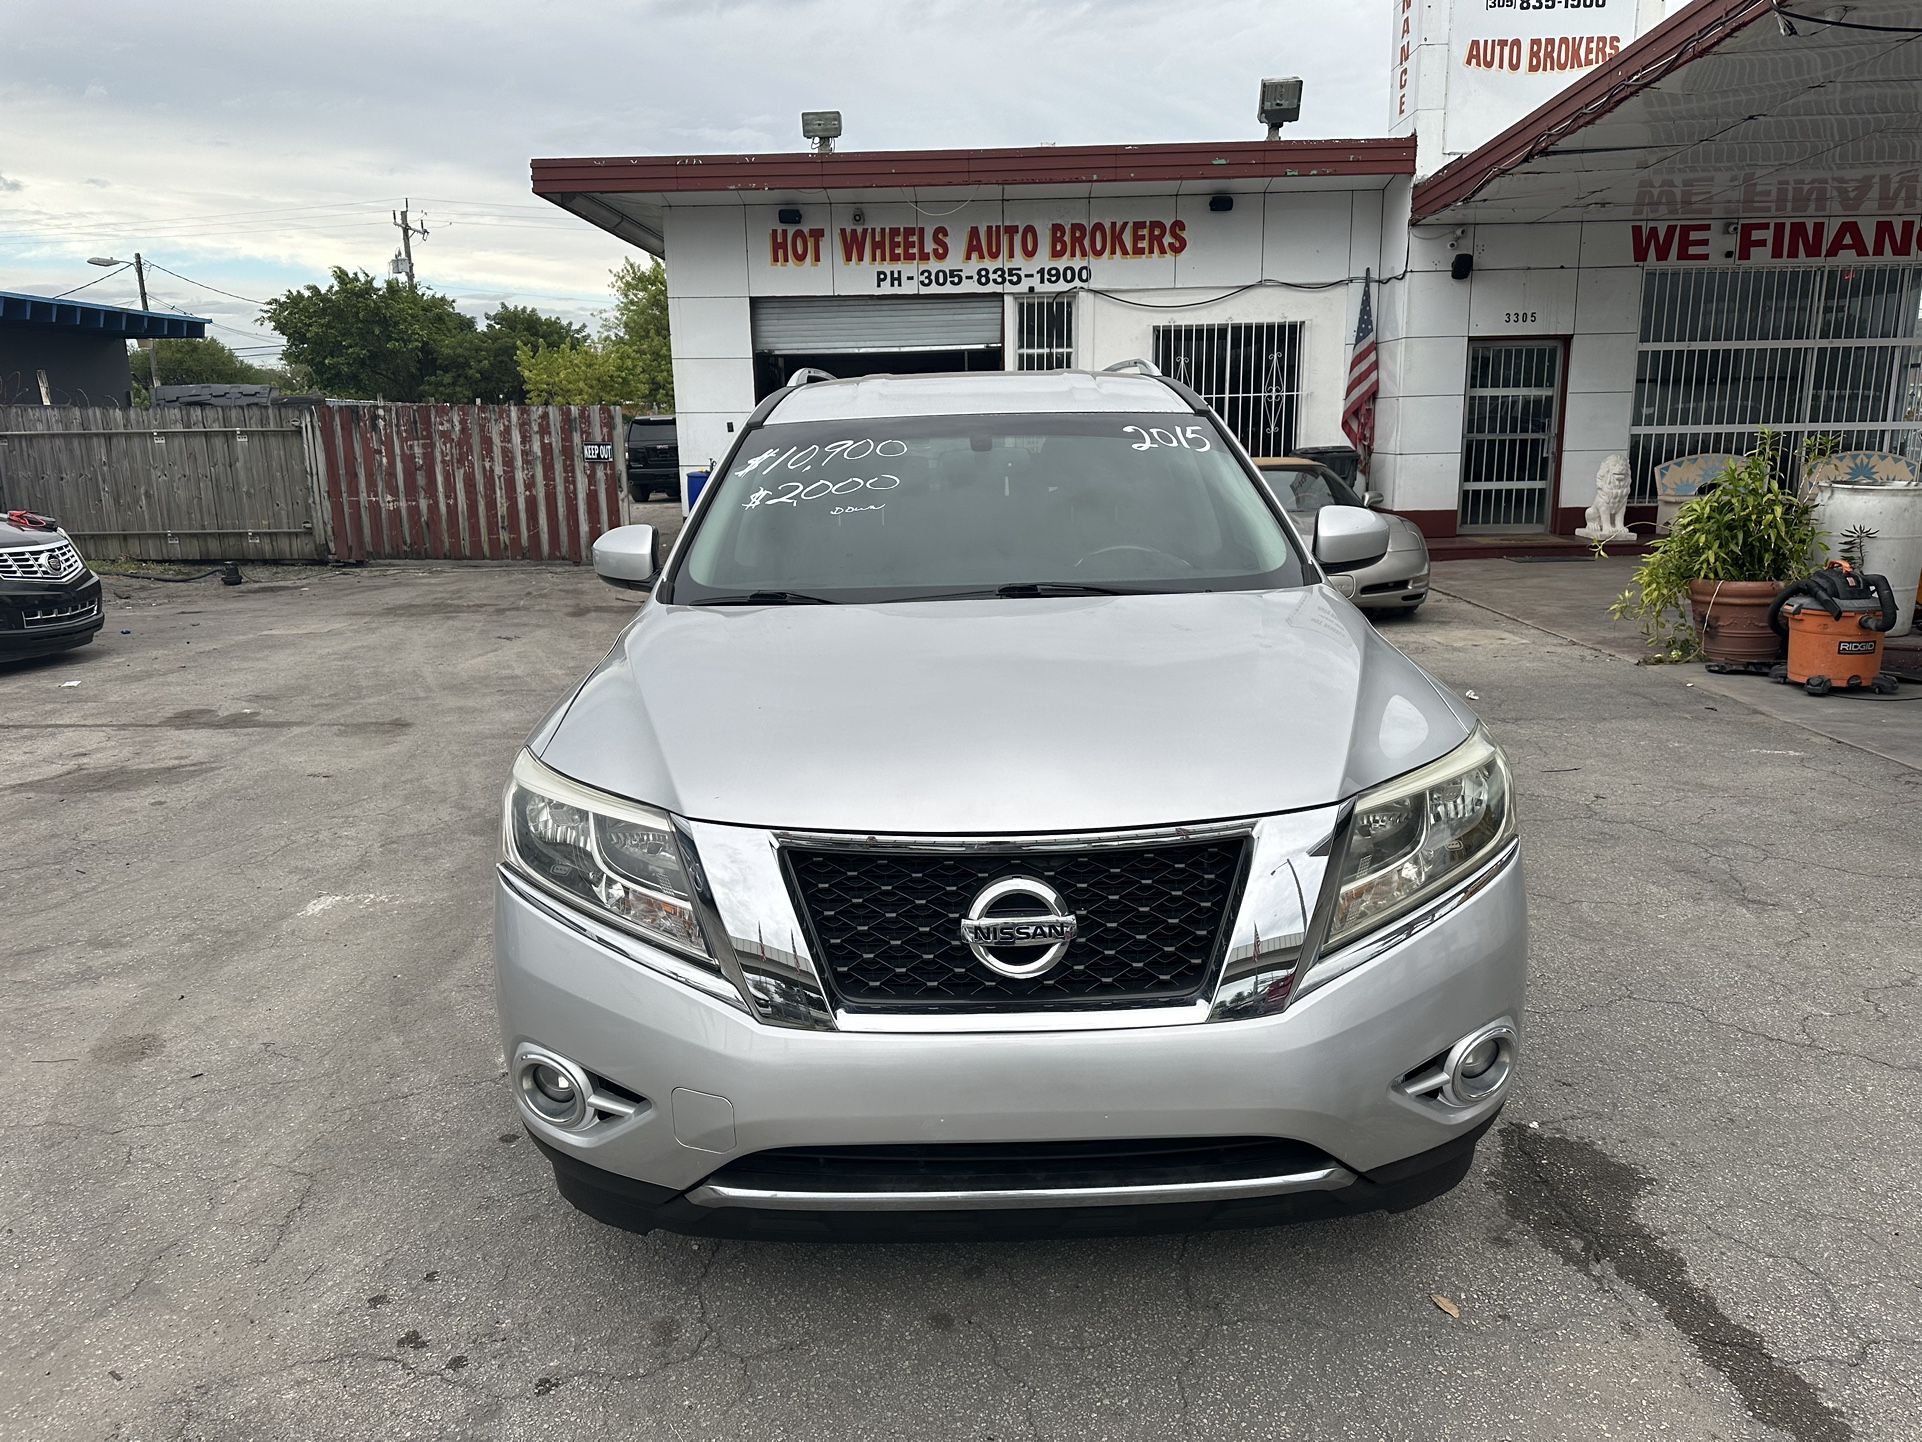 used 2015 nissan pathfinder - back view